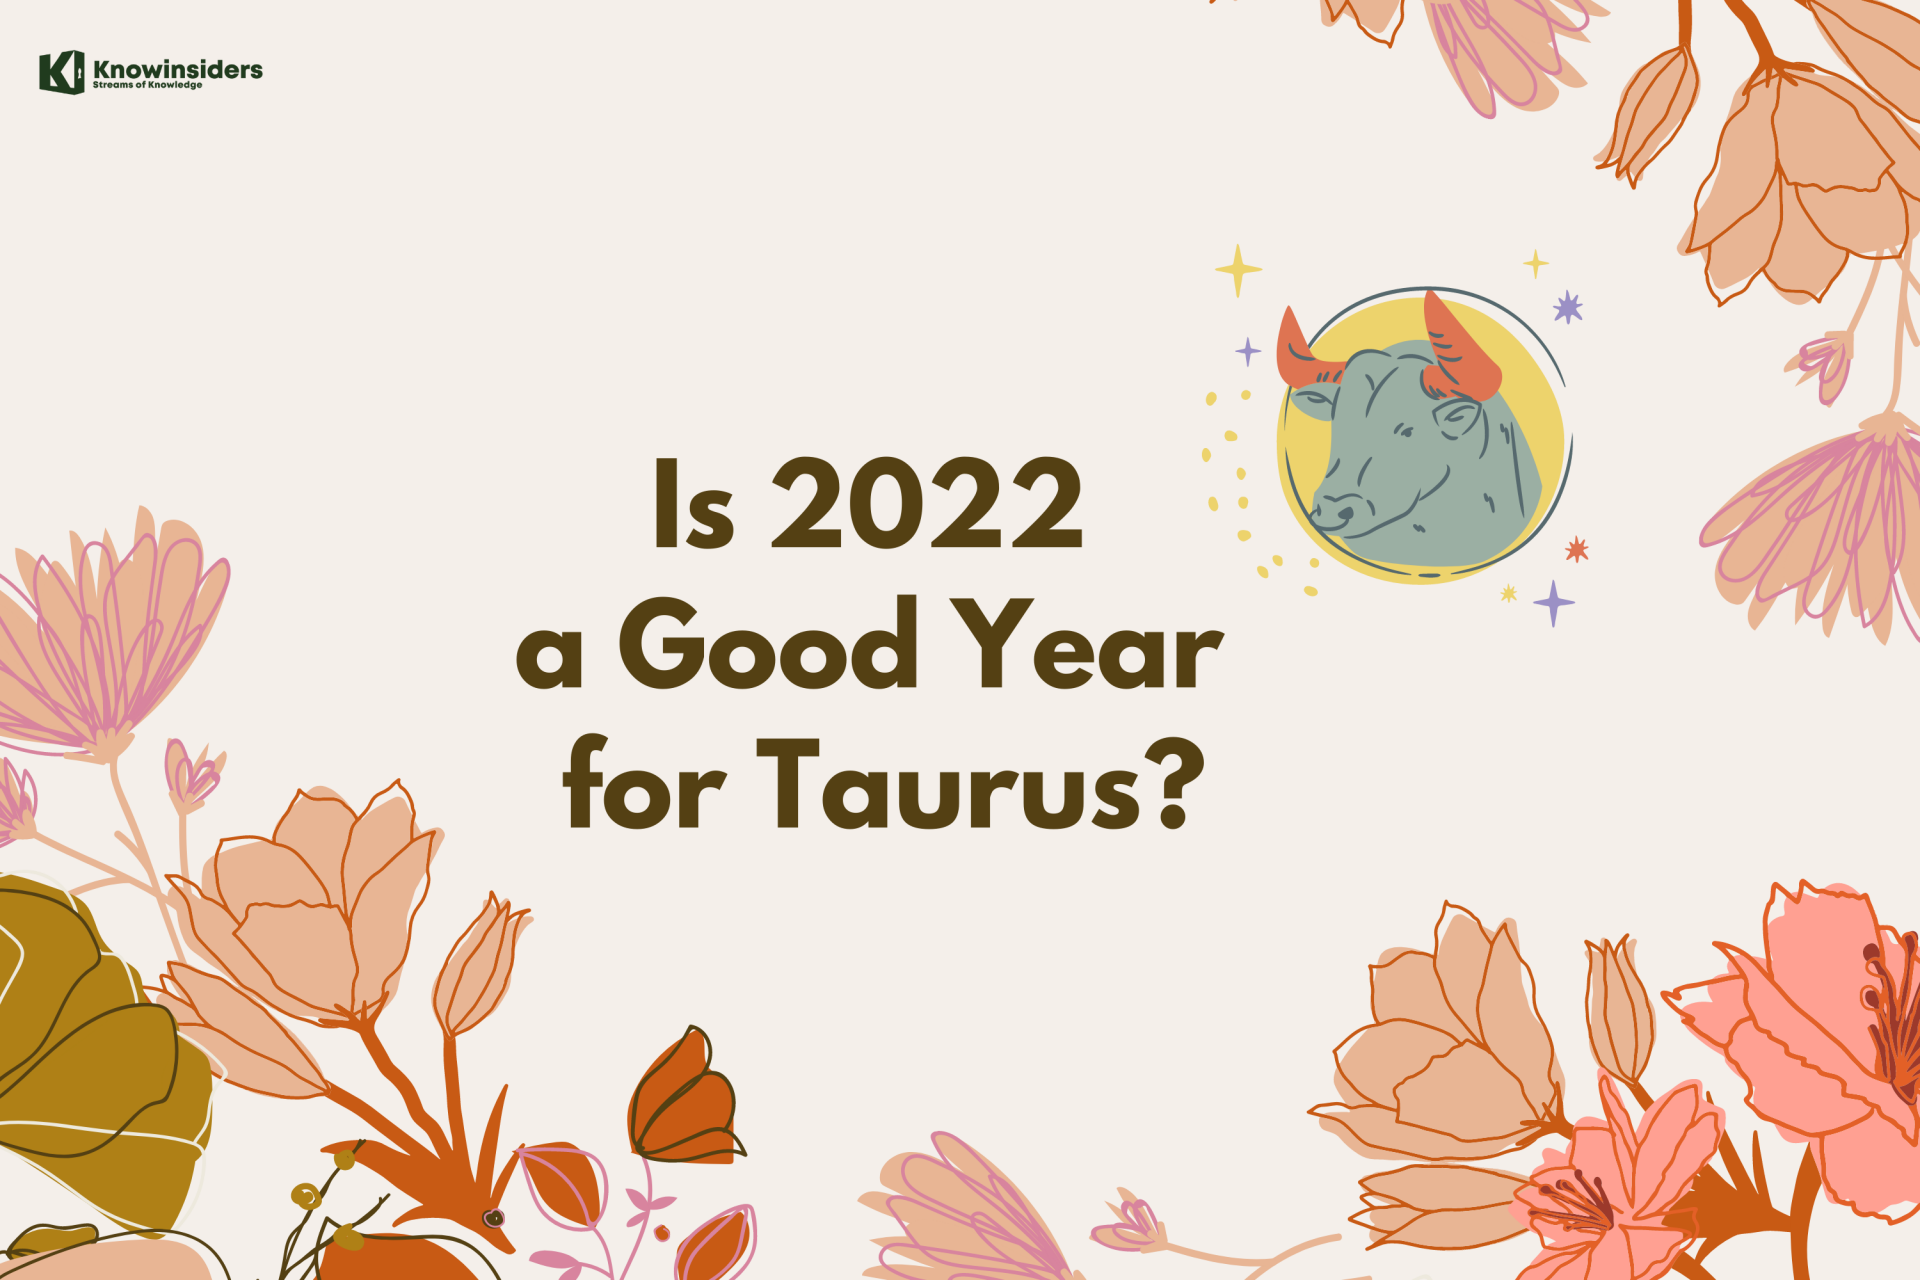 Is 2022 a Good Year for Taurus?